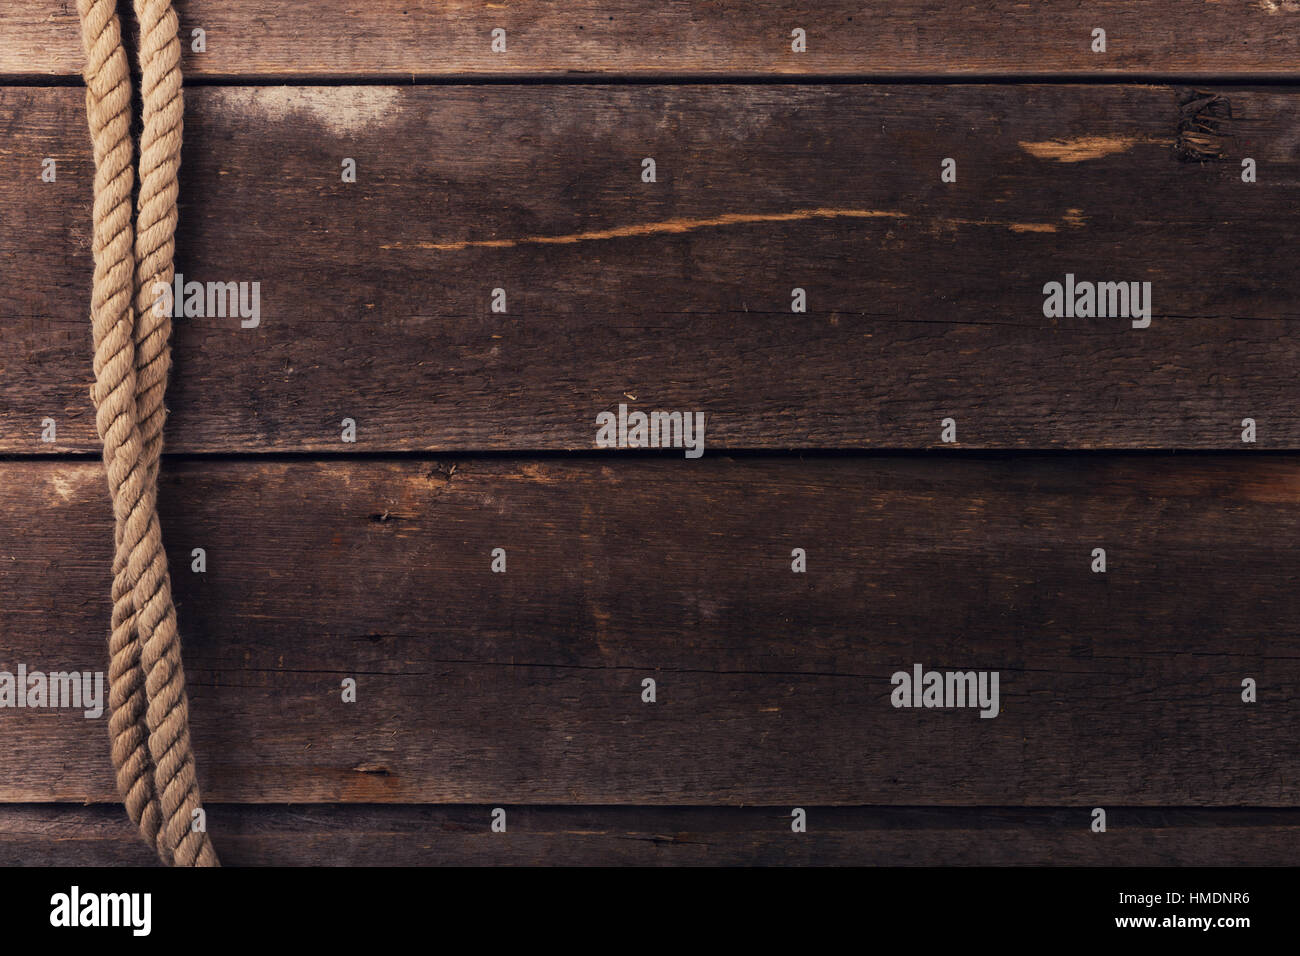 vintage background with old rope on wood planks Stock Photo